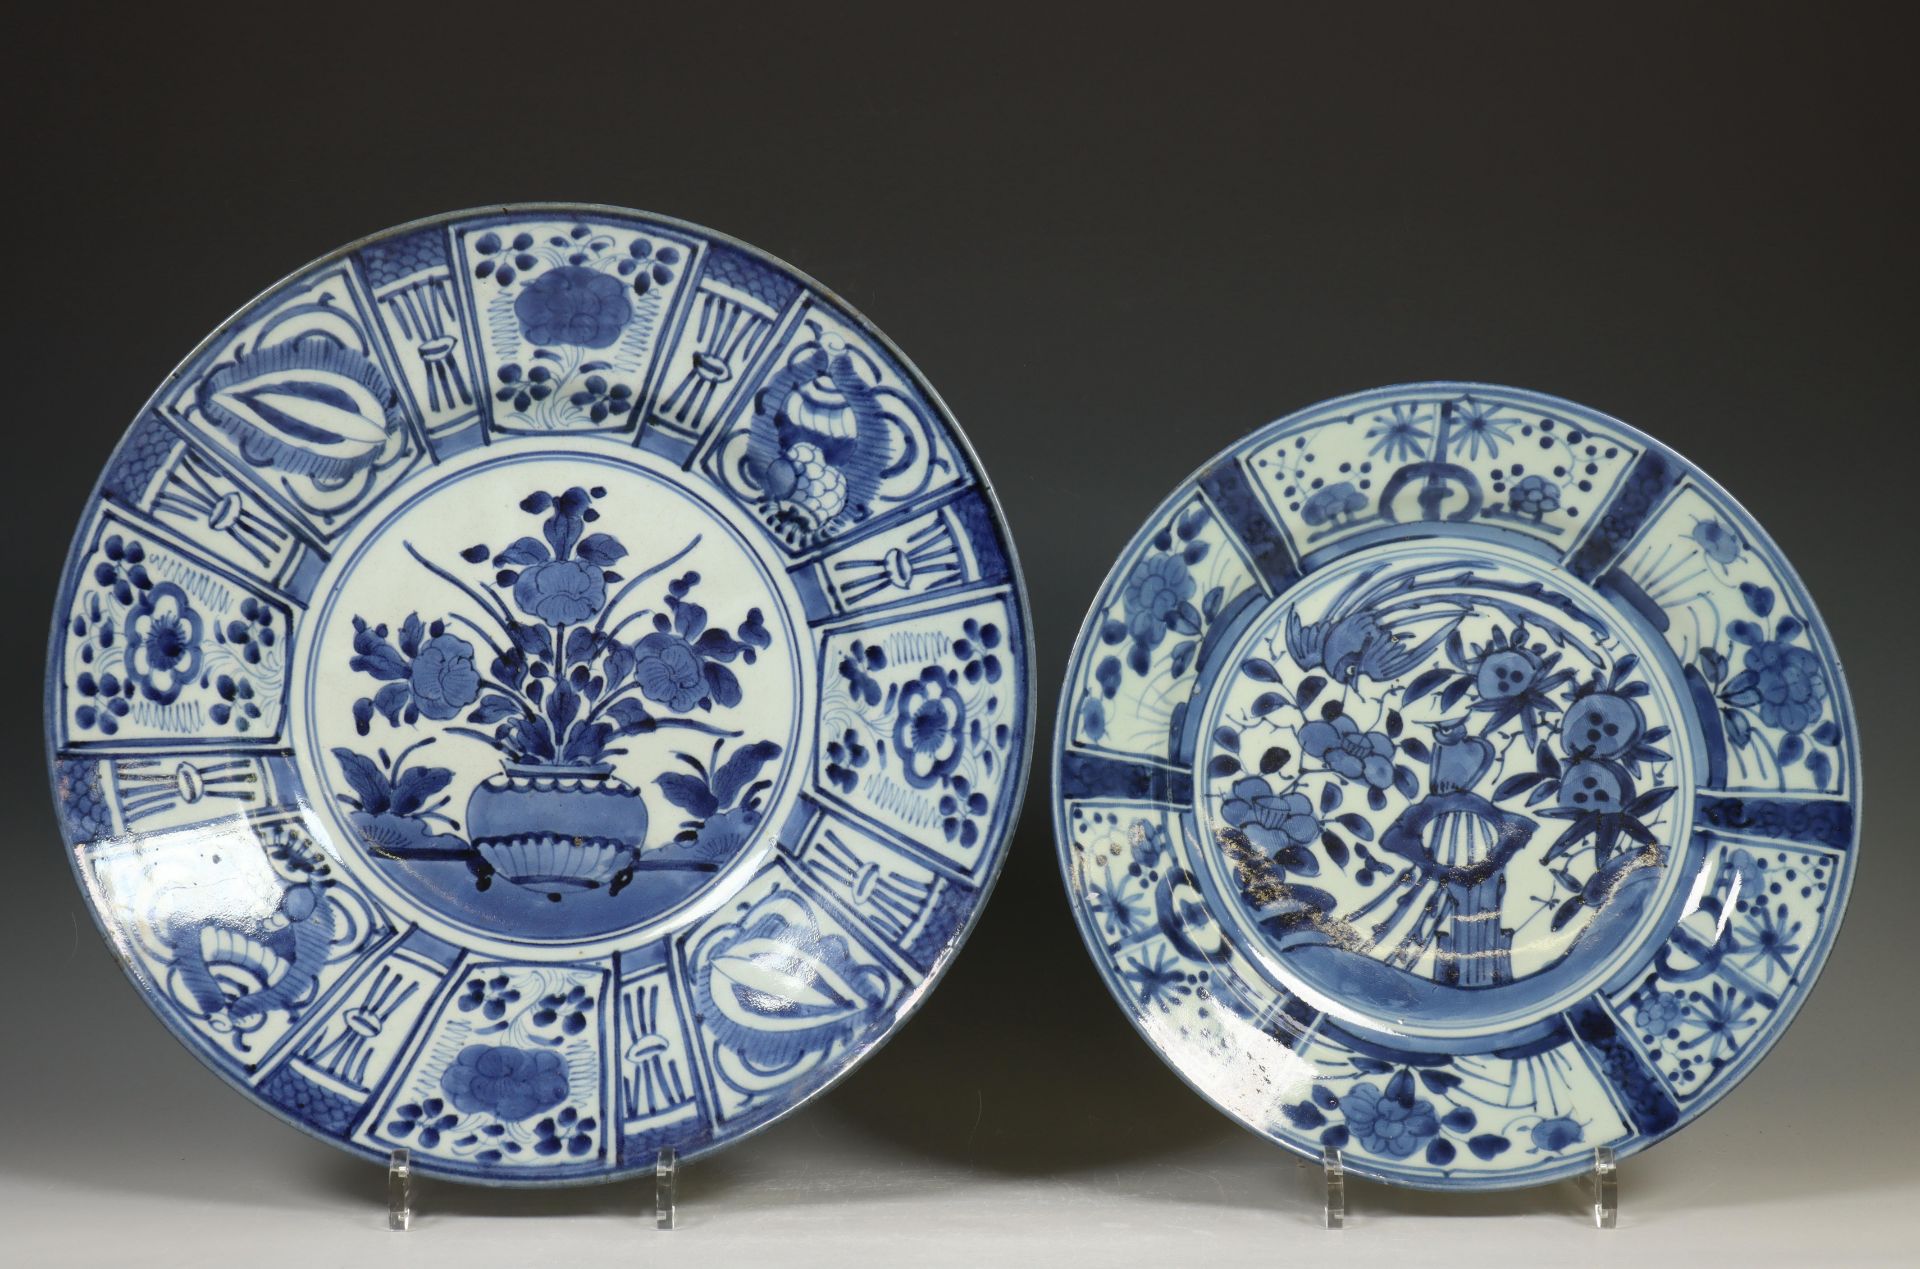 Japan, two Arita blue and white porcelain 'Kraak style' dishes, Edo period, late 17th century,